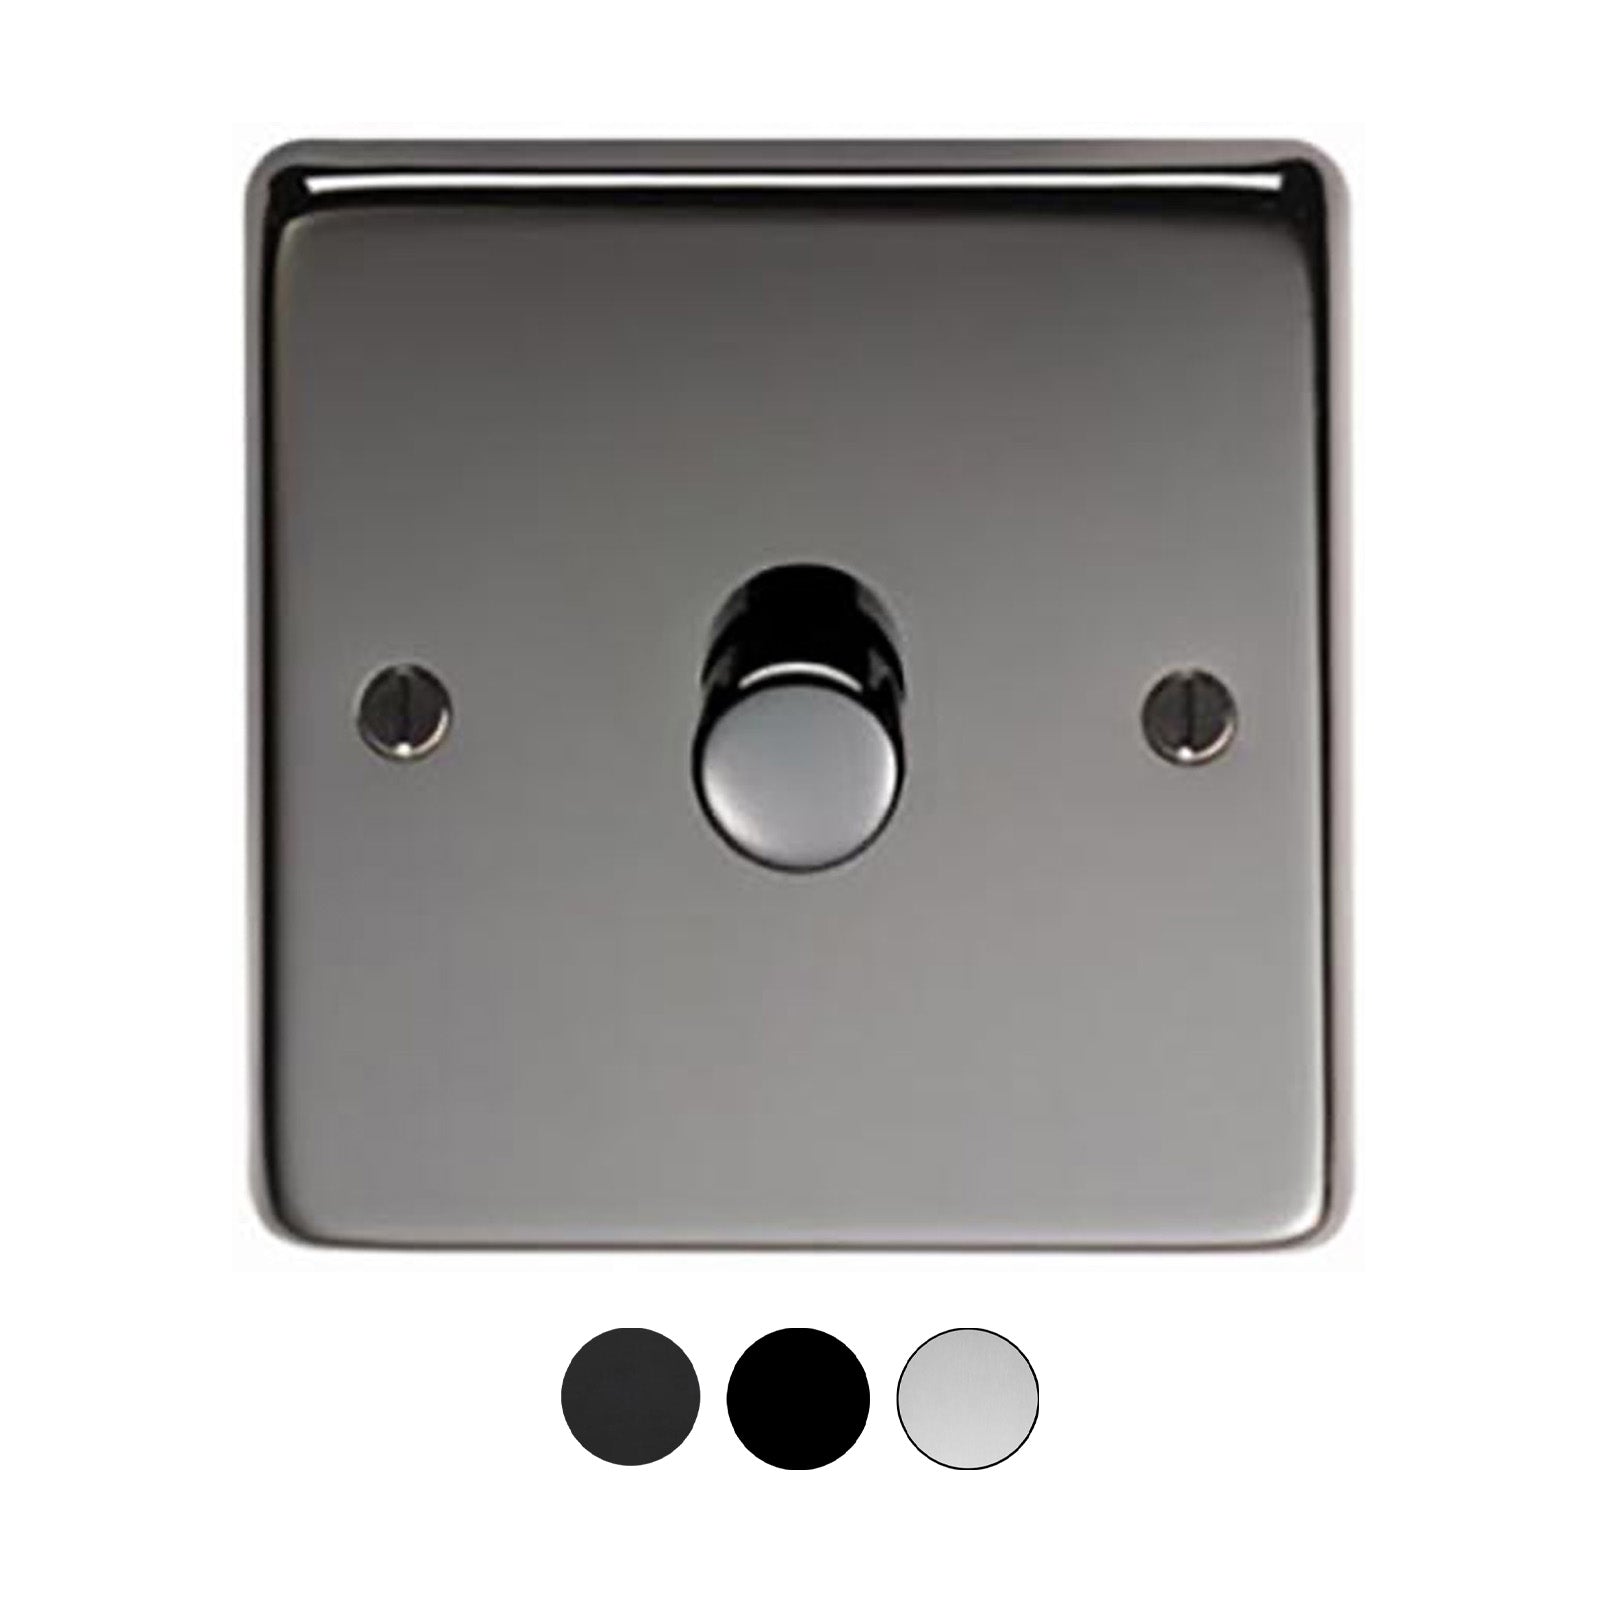 Variant Level Image of Single LED Dimmer Switch with colour options